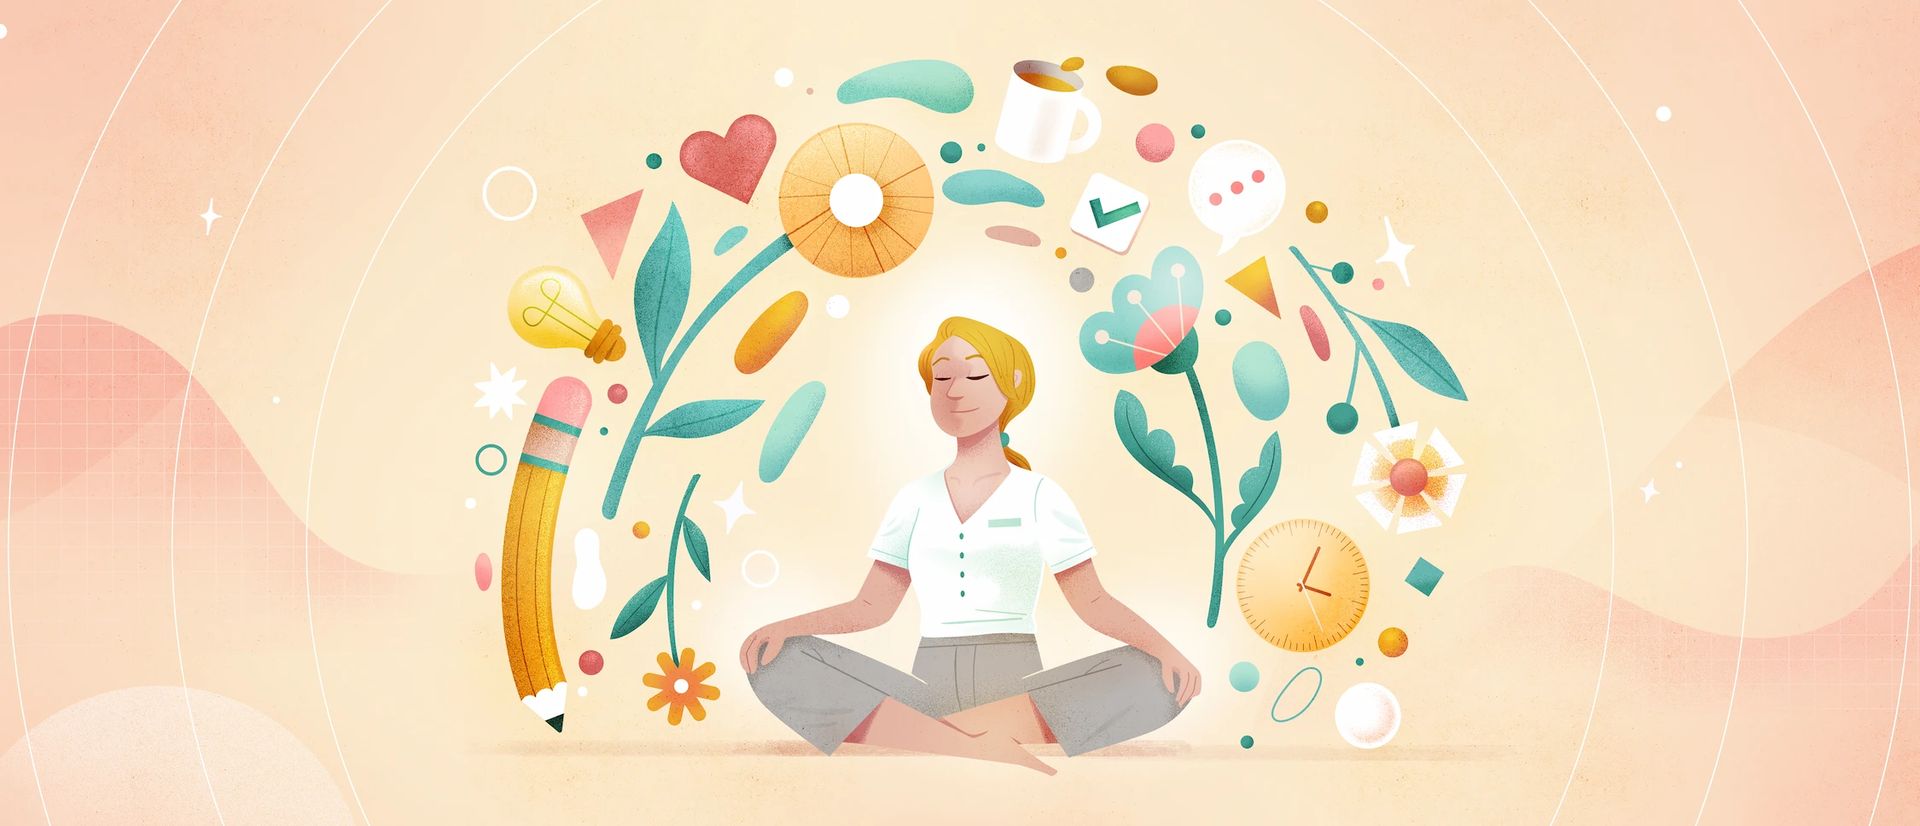 Blonde lady seated in lotus position, meditating, with various elements floating around her: pencil, flowers, heart, clock, etc.